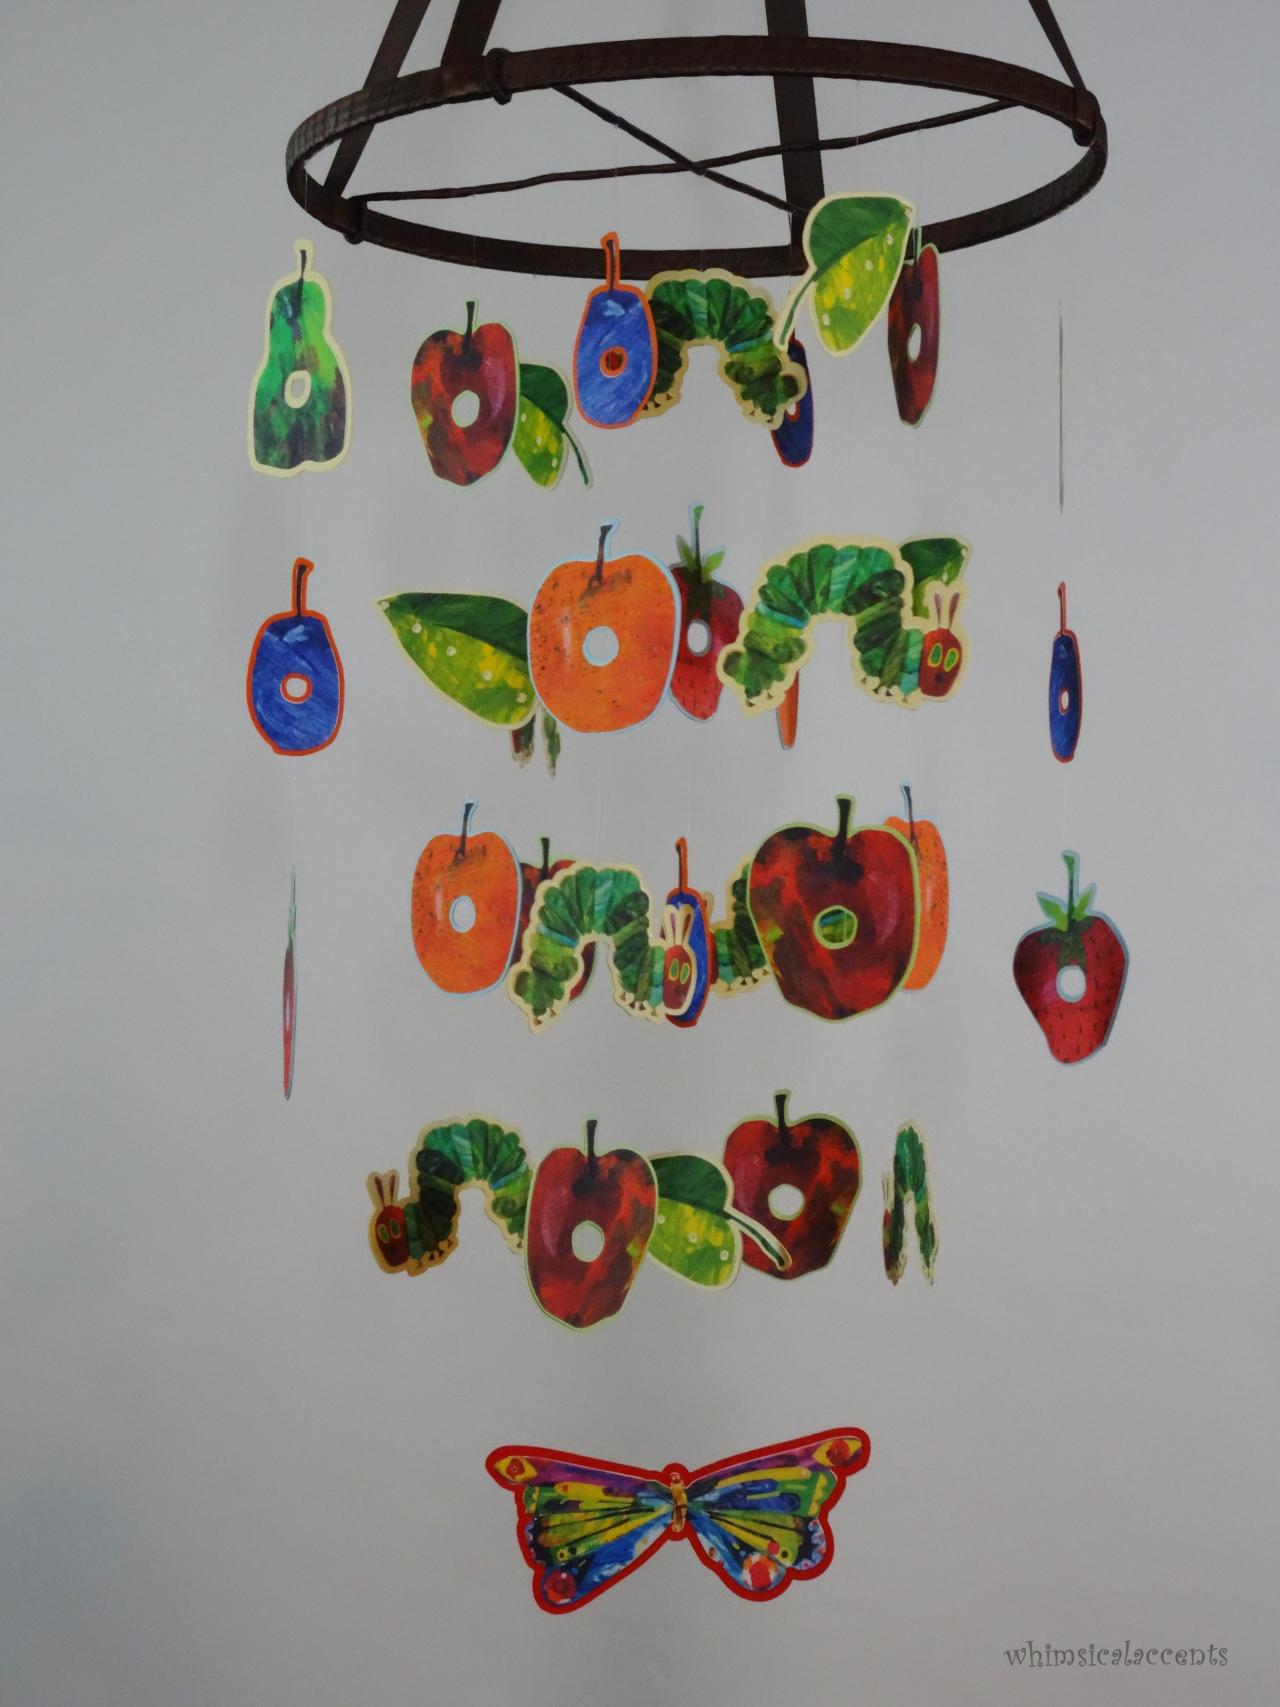 The Very Hungry Caterpillar Nursery Decorative Mobile, Bedroom Or Classroom